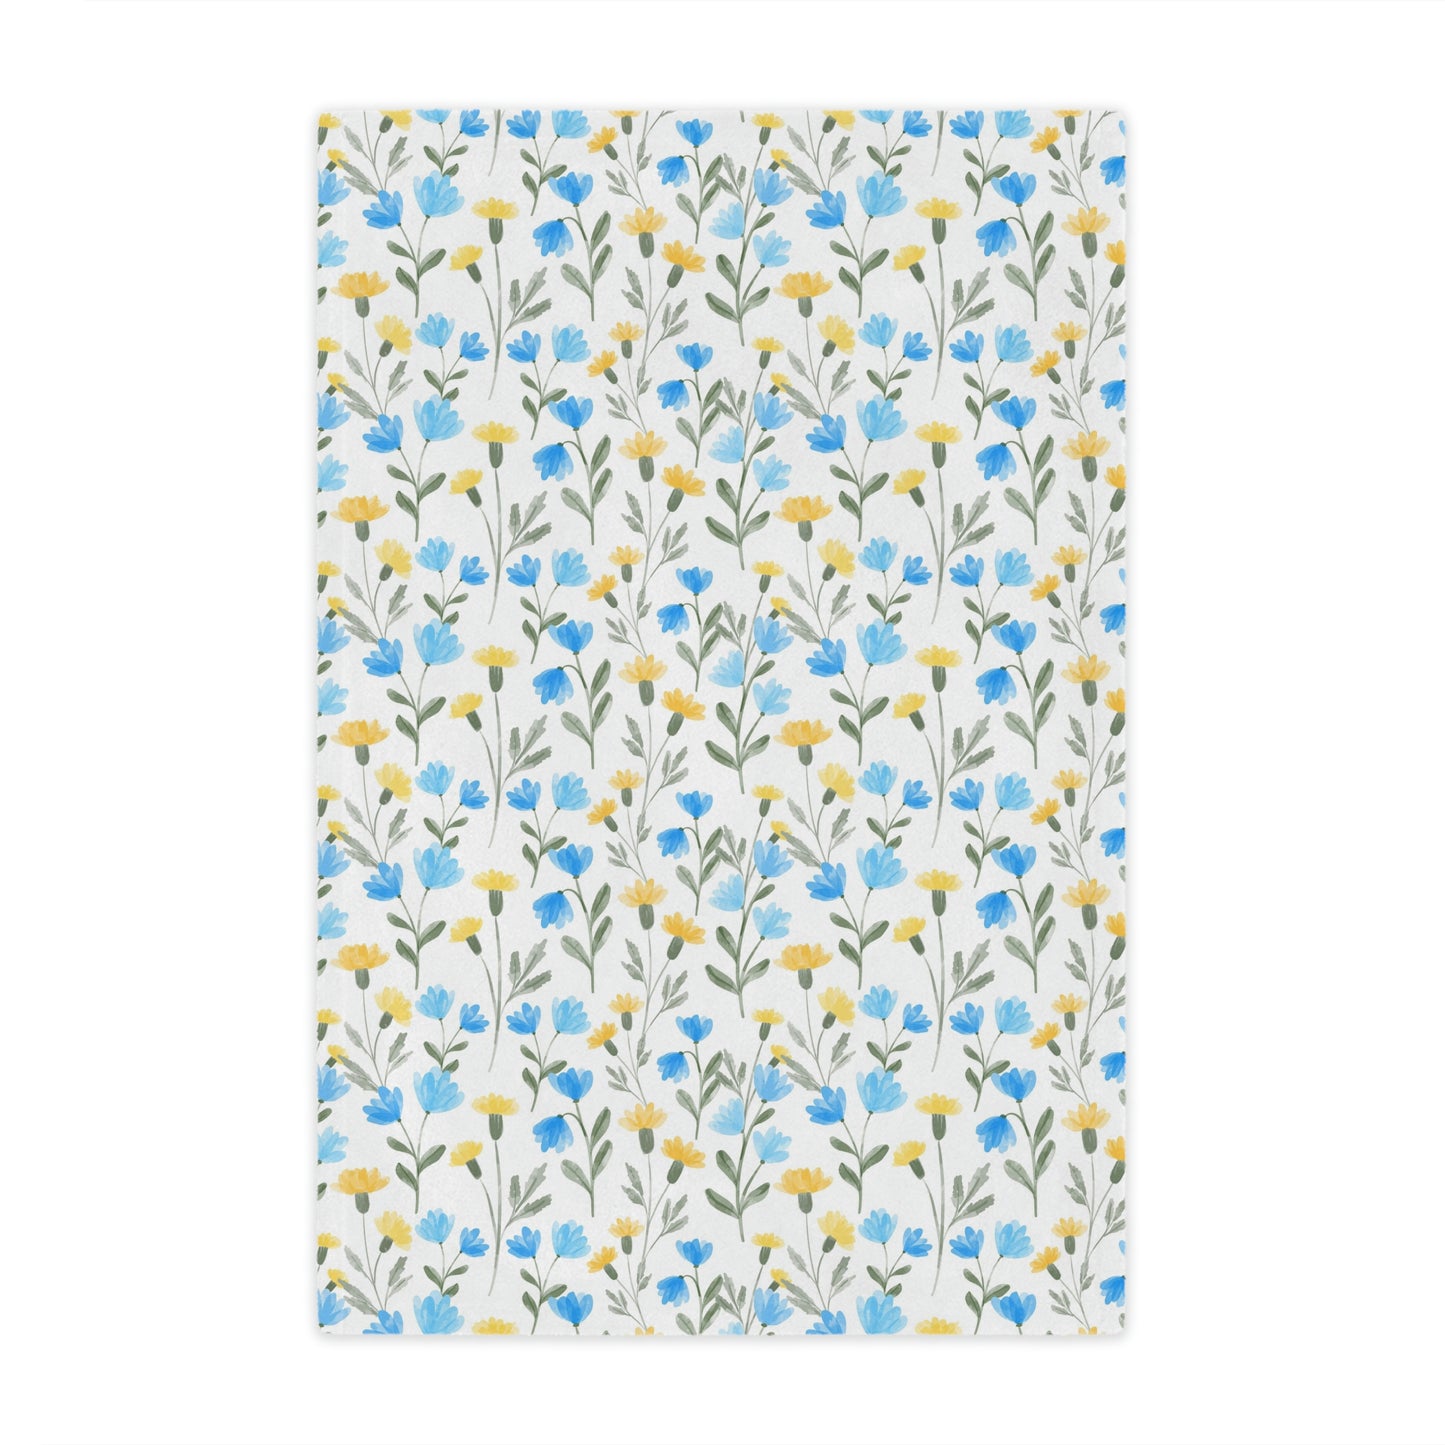 blue and yellow wildflower print on a plush throw blanket, blue and yellow floral throw blanket lying on a bed